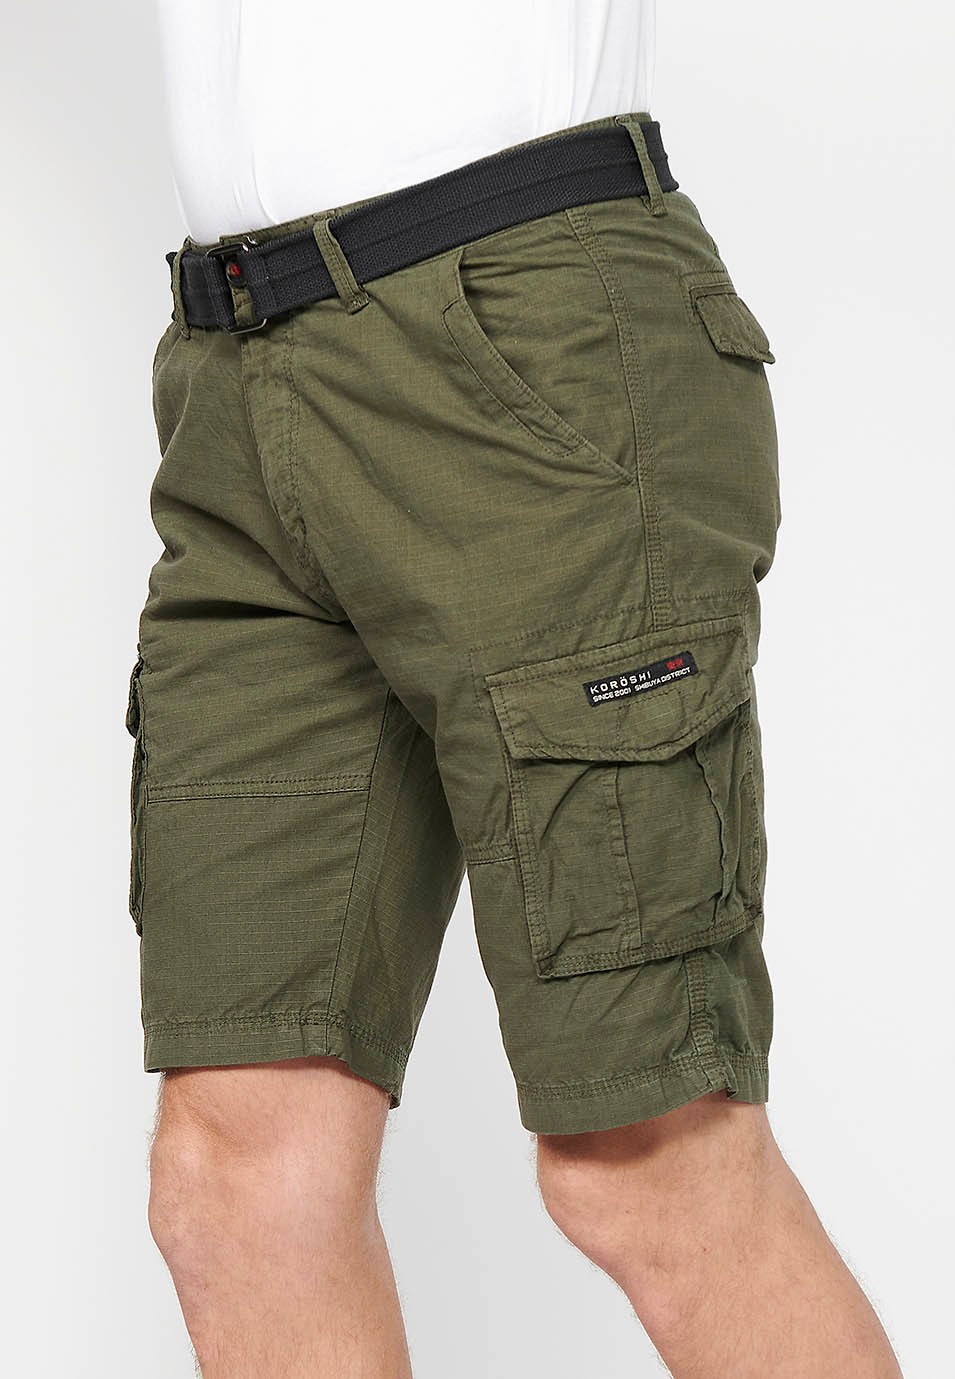 Cotton cargo shorts with belt and front closure with zipper and button with pockets, two back pockets with flap and two green cargo pants for Men 1